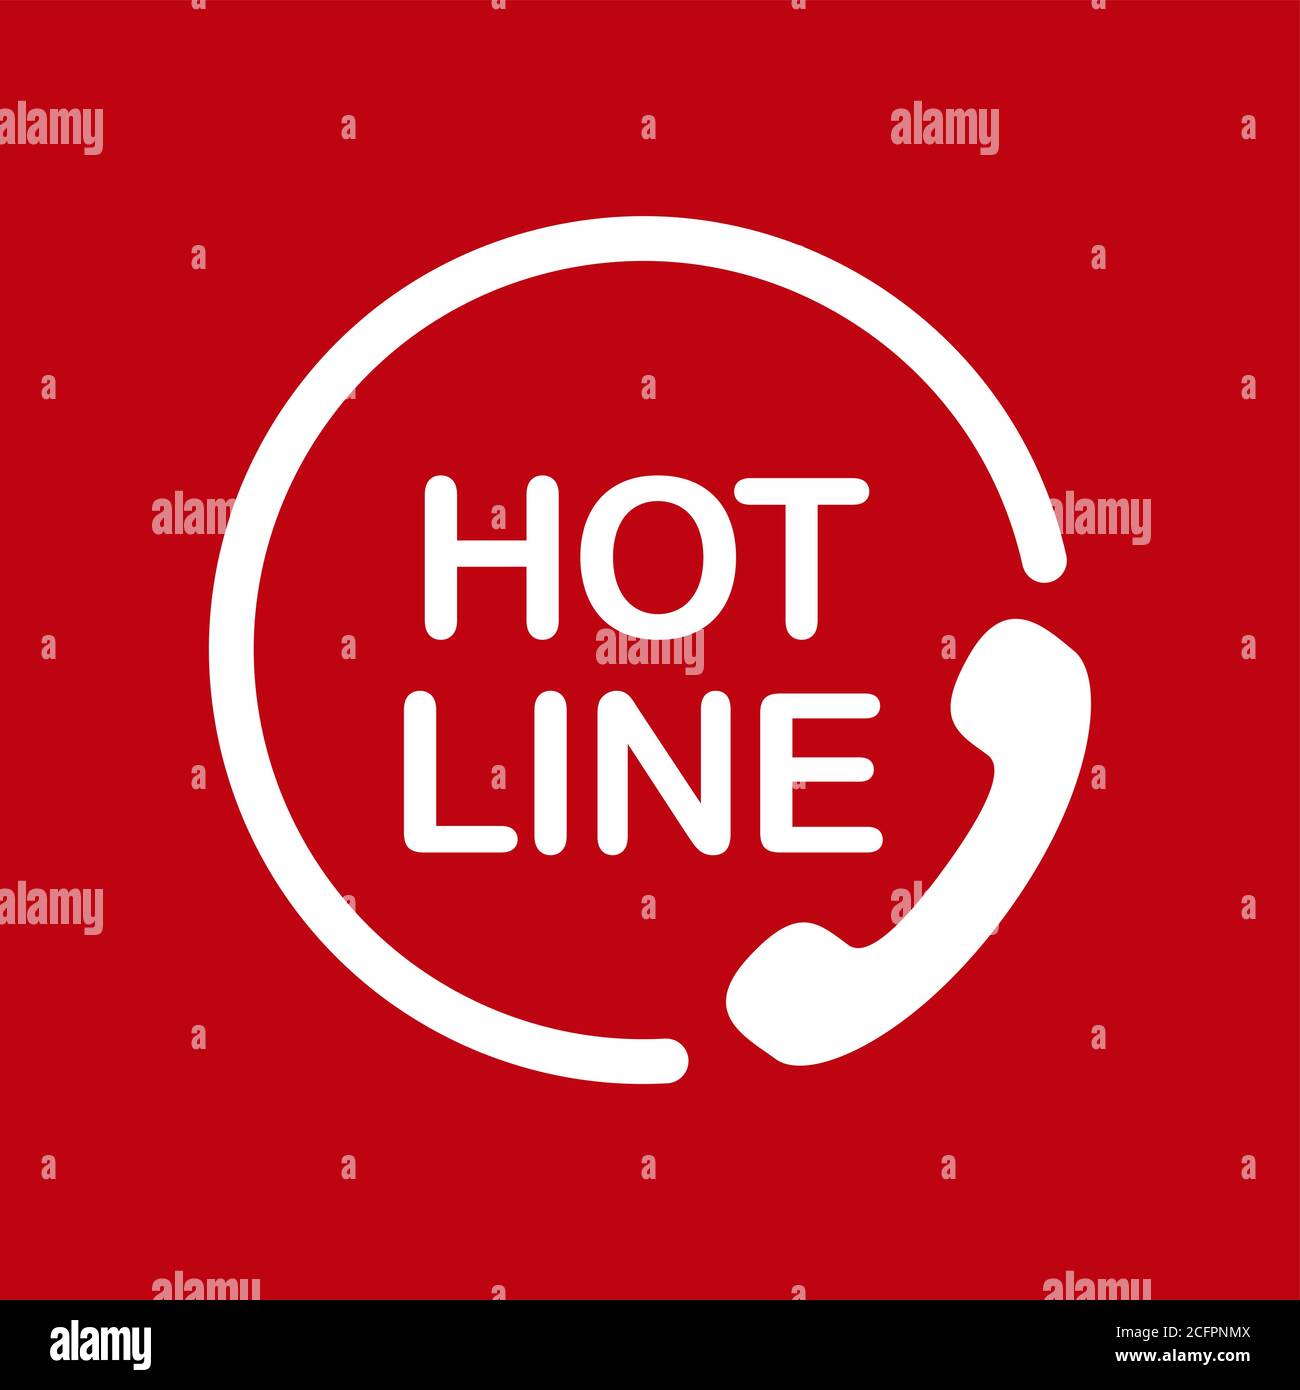 Hot line icon. Attendance number symbol. White sign on red background. Stock Vector